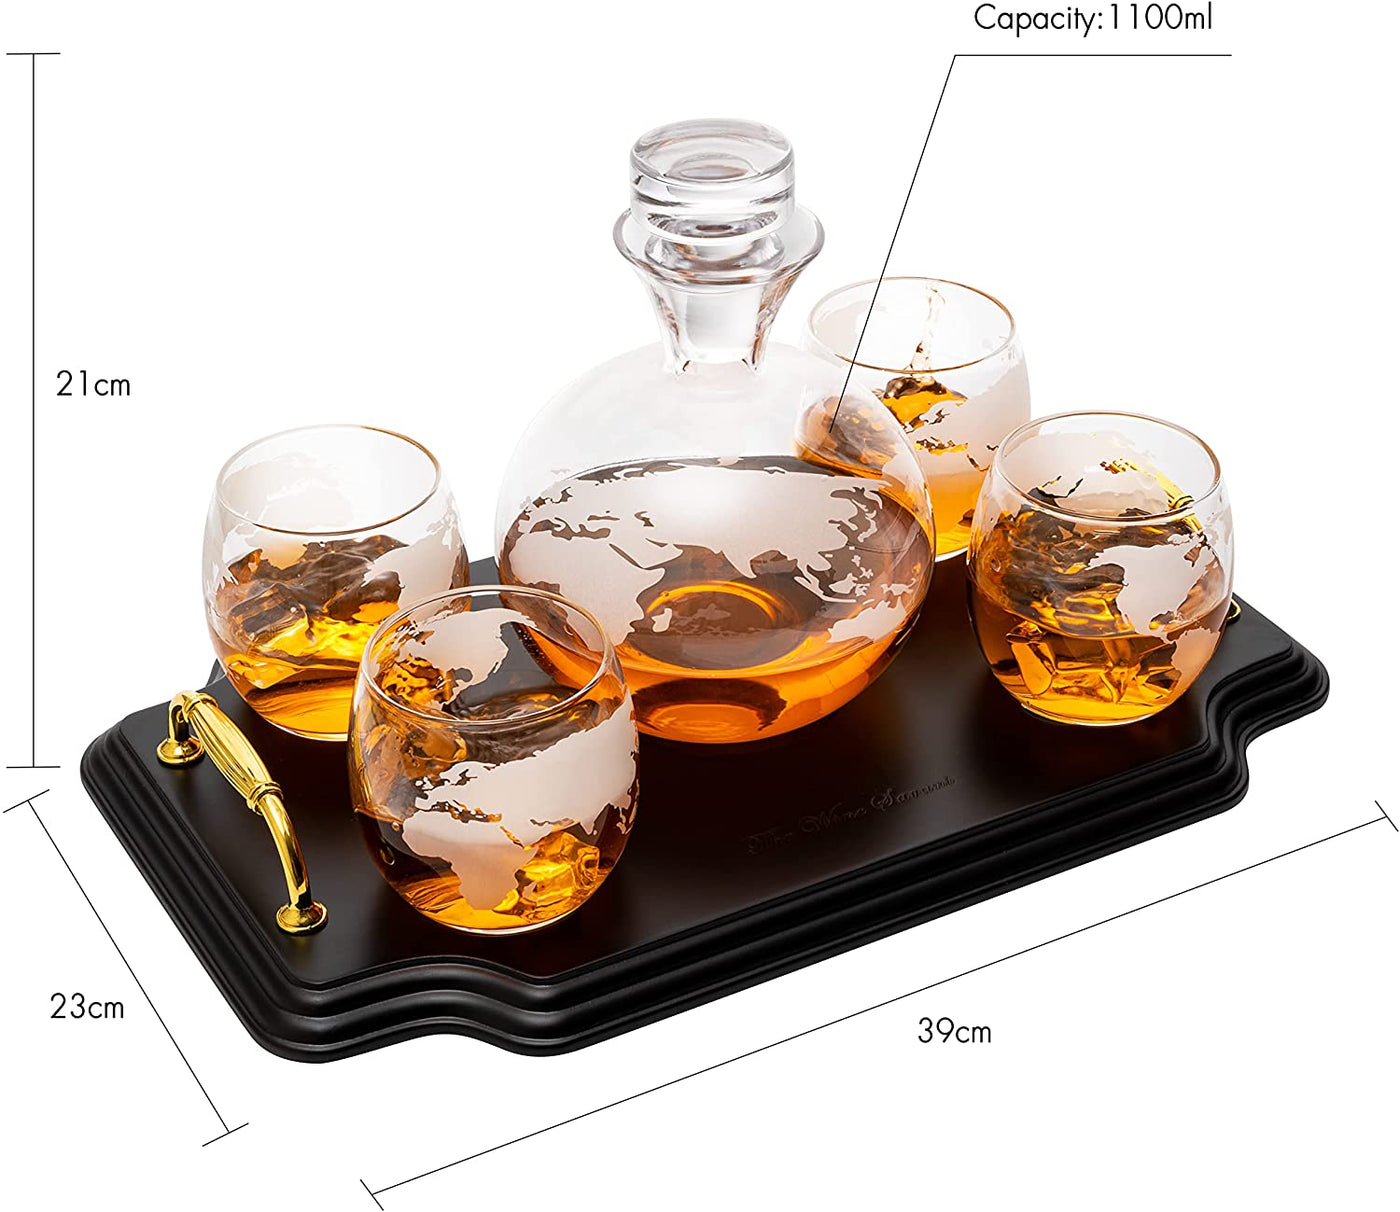 Etched World Map Globe Whiskey Decanter Set 750ml With 4 10oz Map Glasses 13" H x 13" L by Liquor Lux - Traveler Gifts, Home Bar, Whiskey Gifts, Cartography, Geography Gifts, Cosmopolitan Gifts